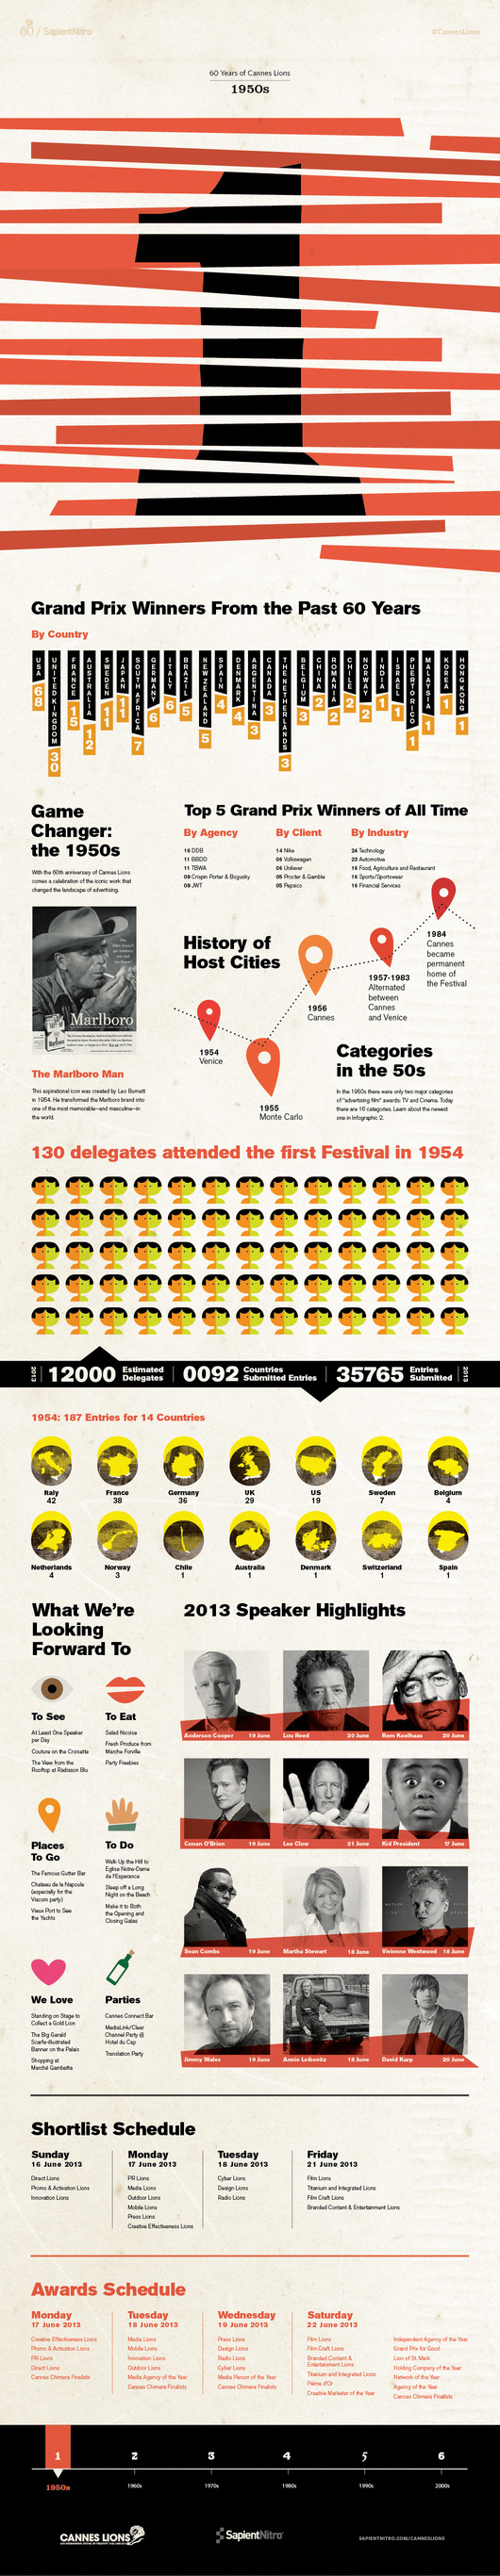 cannes%20_2013_infographic_one_large.jpg